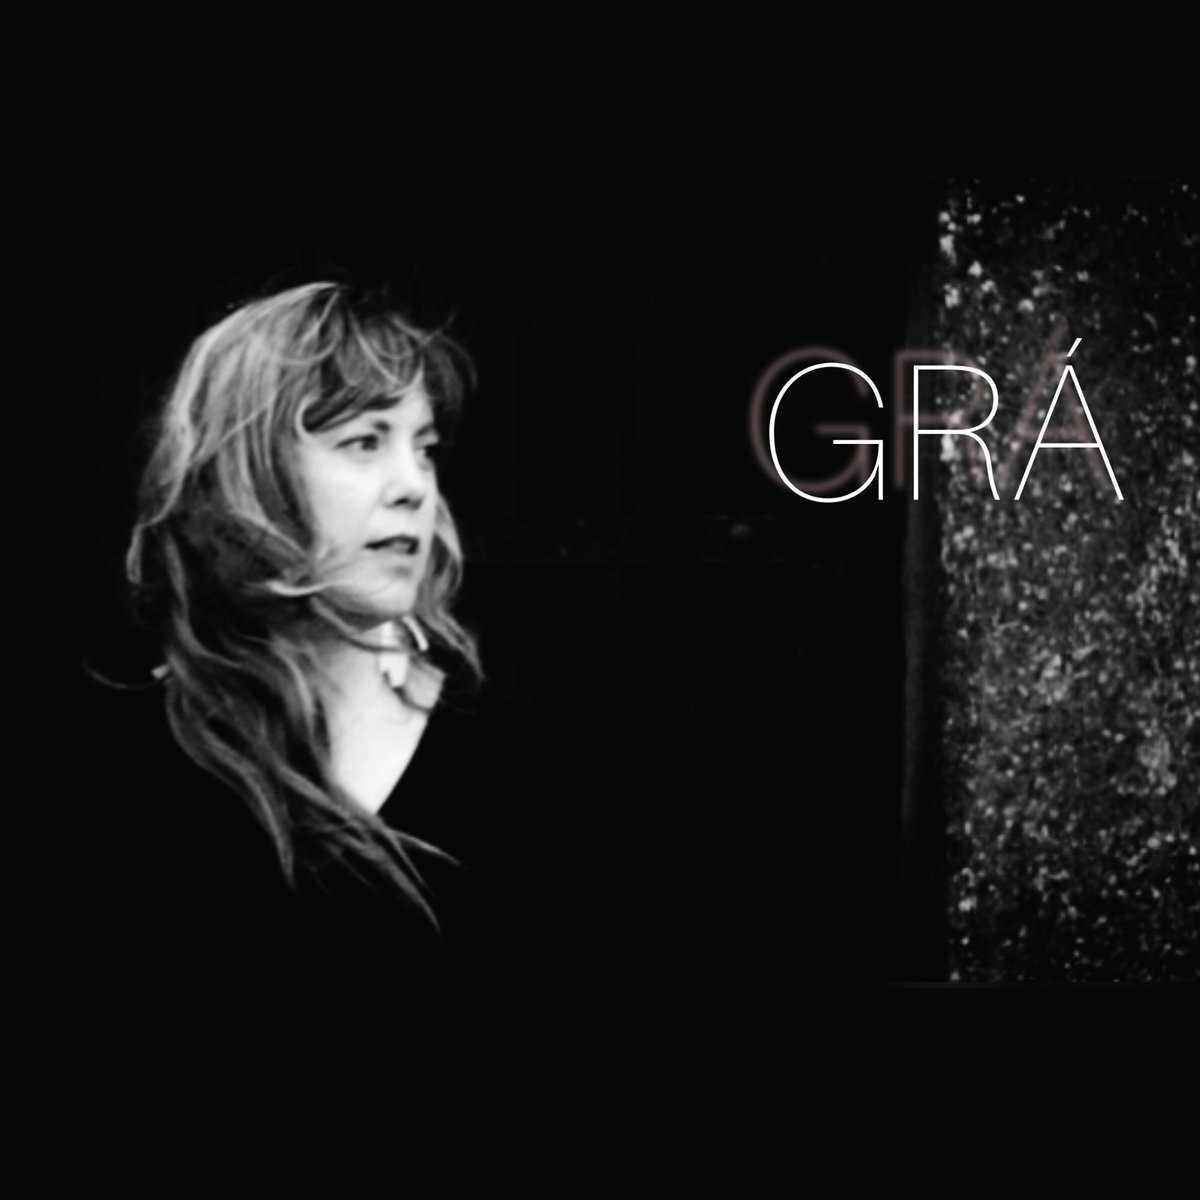 Beannachtai Lá Féile Bríde <3 
'Grá' goes live today across all musical platforms. The video will go live this evening at 5.45pm. Looking forward to sharing with you later, hope you've a lovely day x
#irishmusic #irish #ireland #celticmusic #music #celtic #dancemusic #irishsong